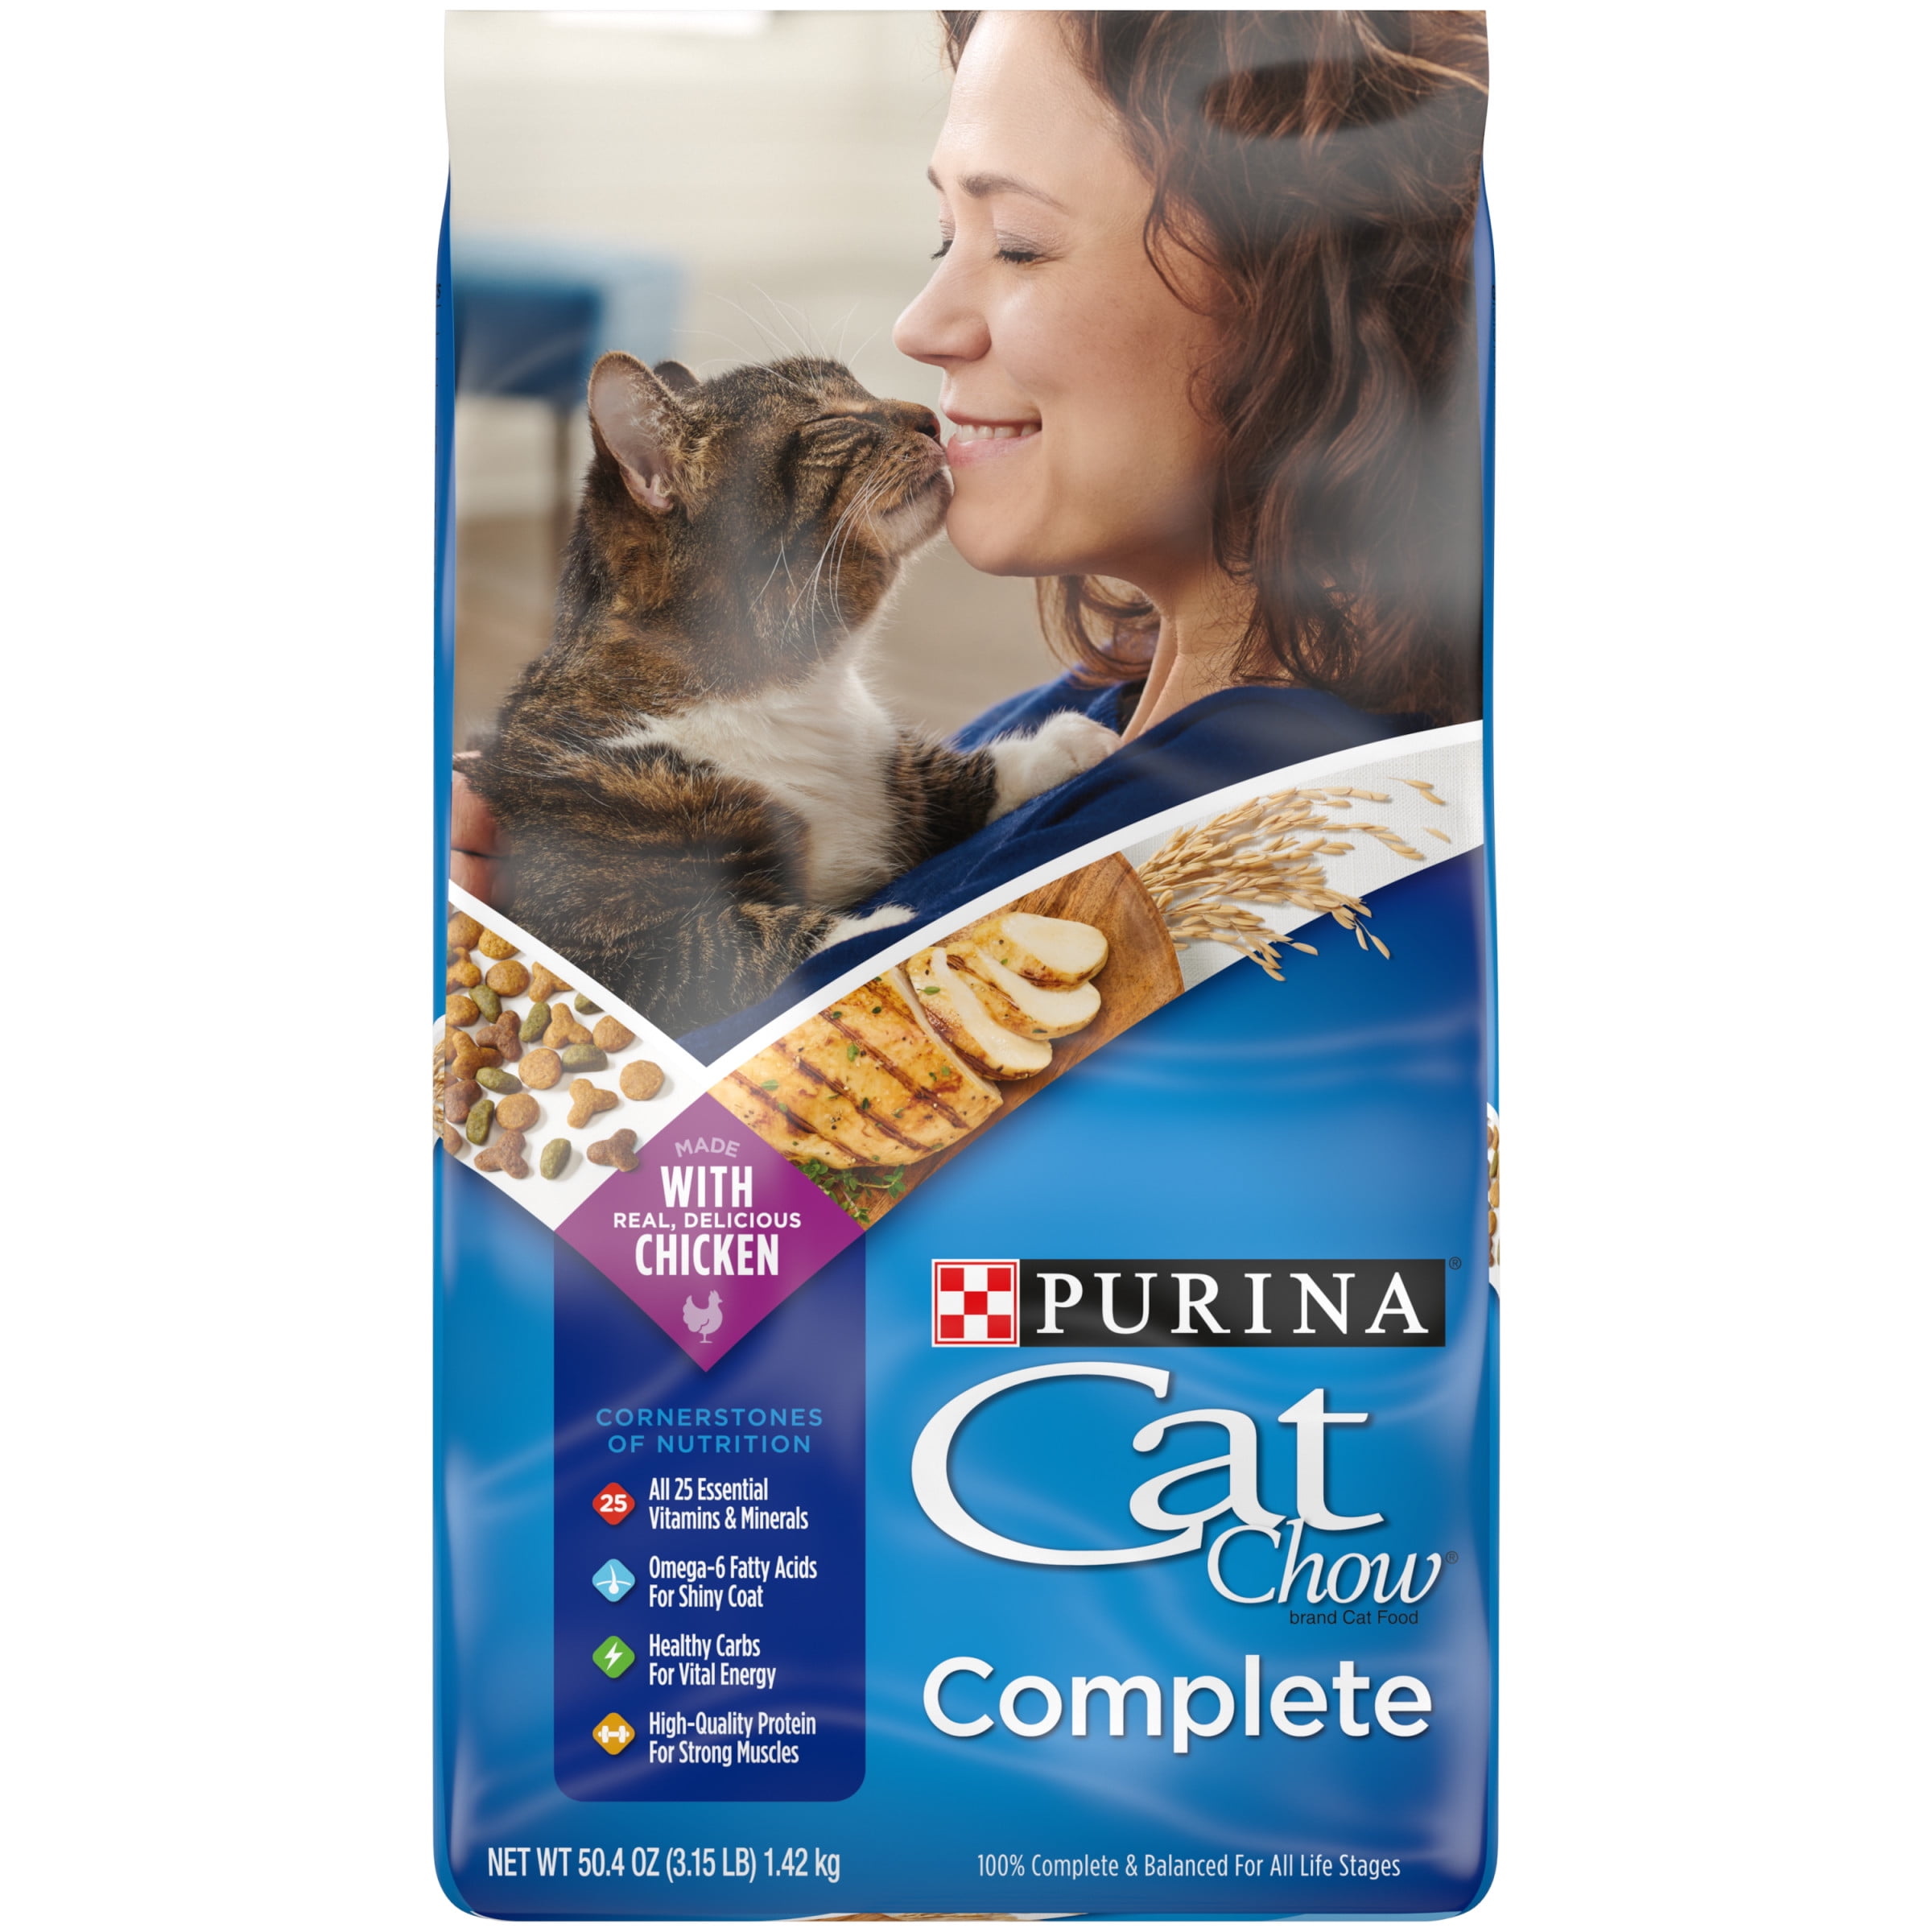 Purina Cat Chow Complete Dry Cat Food, 3.15 lb Bag